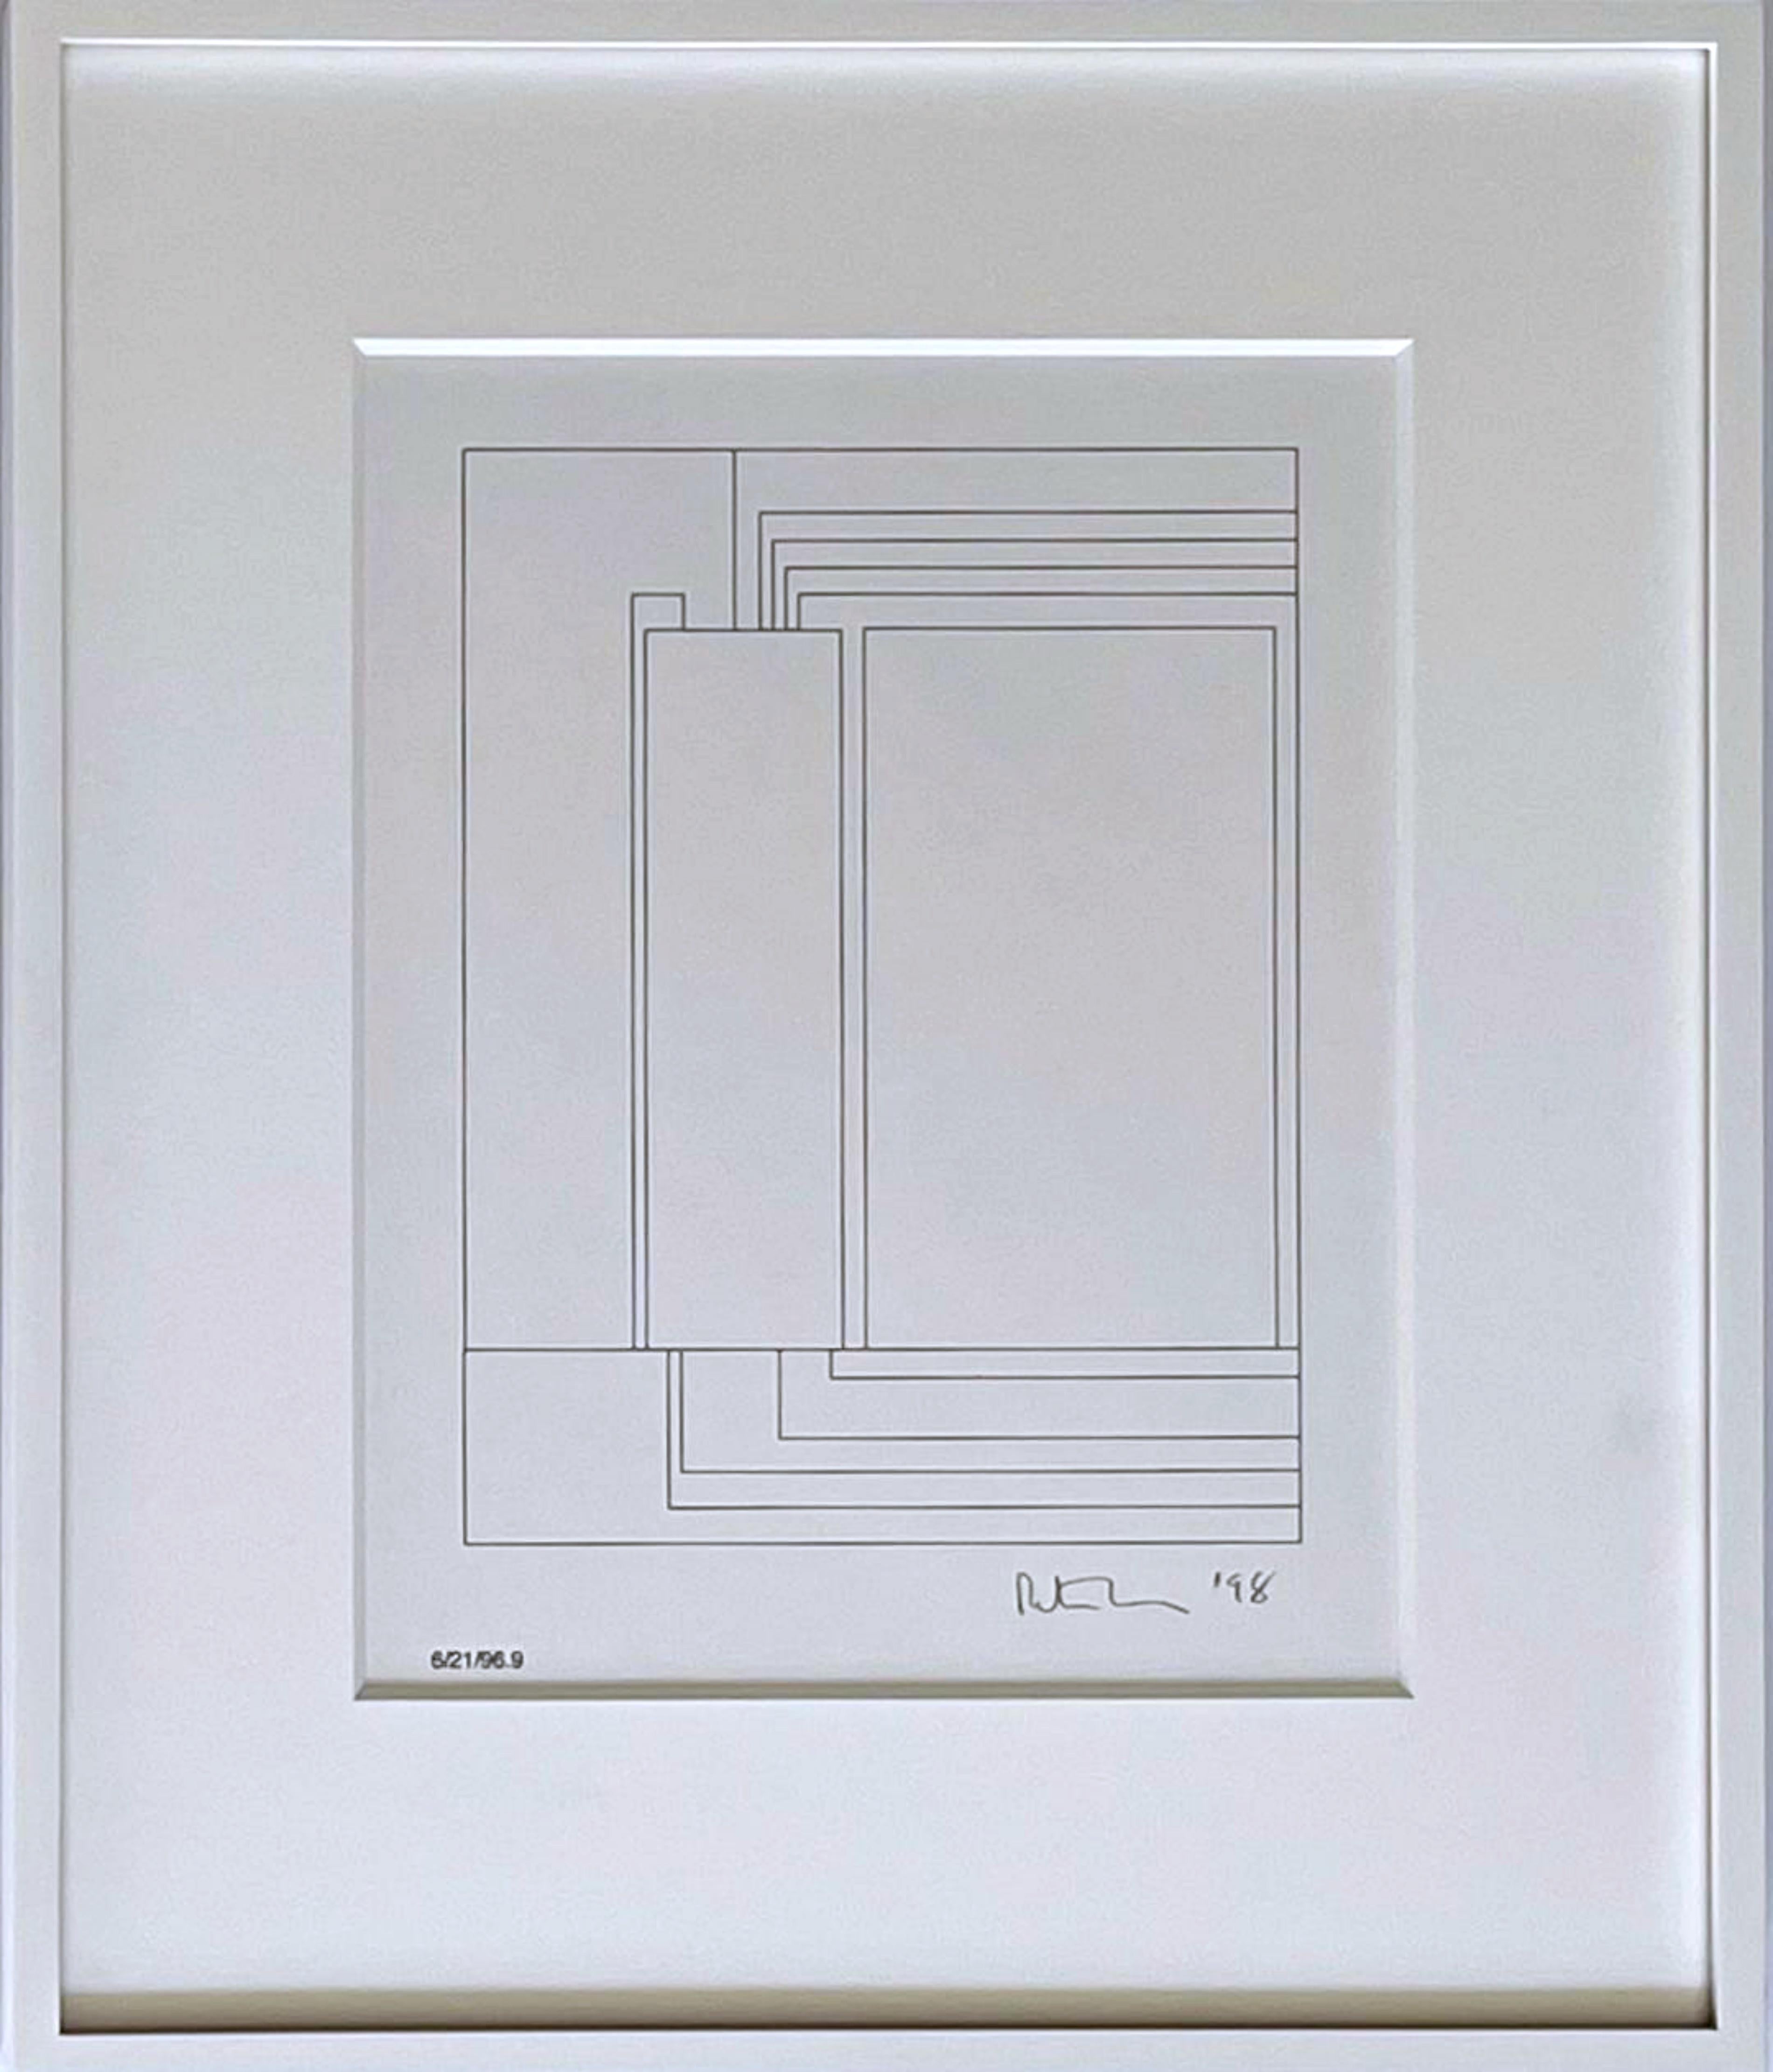 6/21/96.9 (hand signed and dated original graphite drawing; unique) - Mixed Media Art by Peter Halley